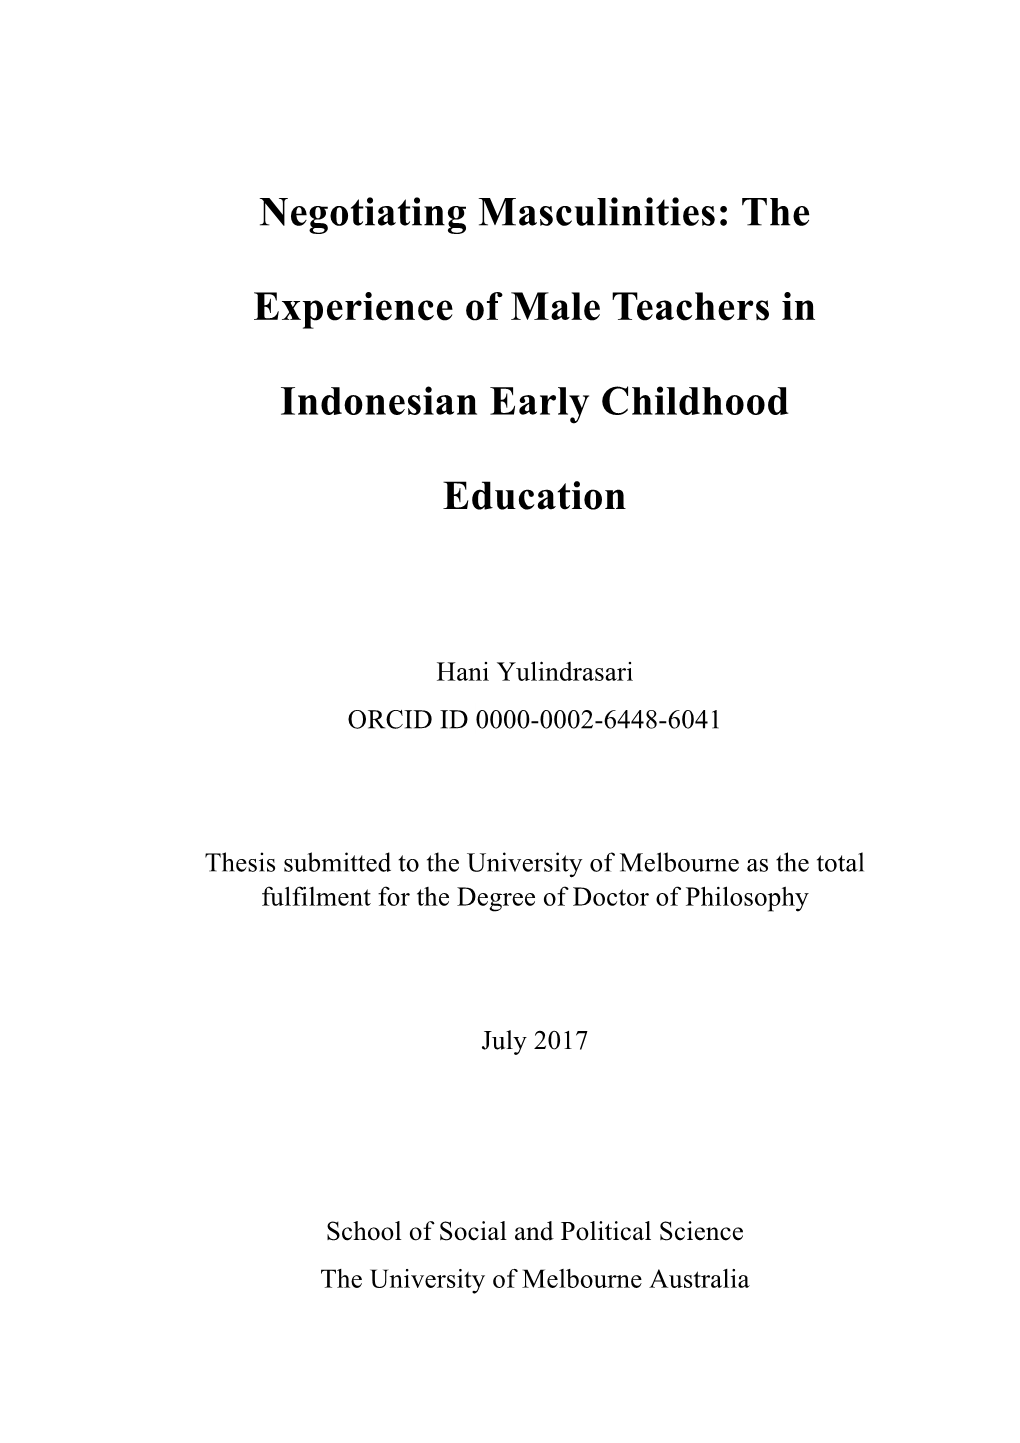 Negotiating Masculinities: the Experience of Male Teachers in Indonesian Early Childhood Education